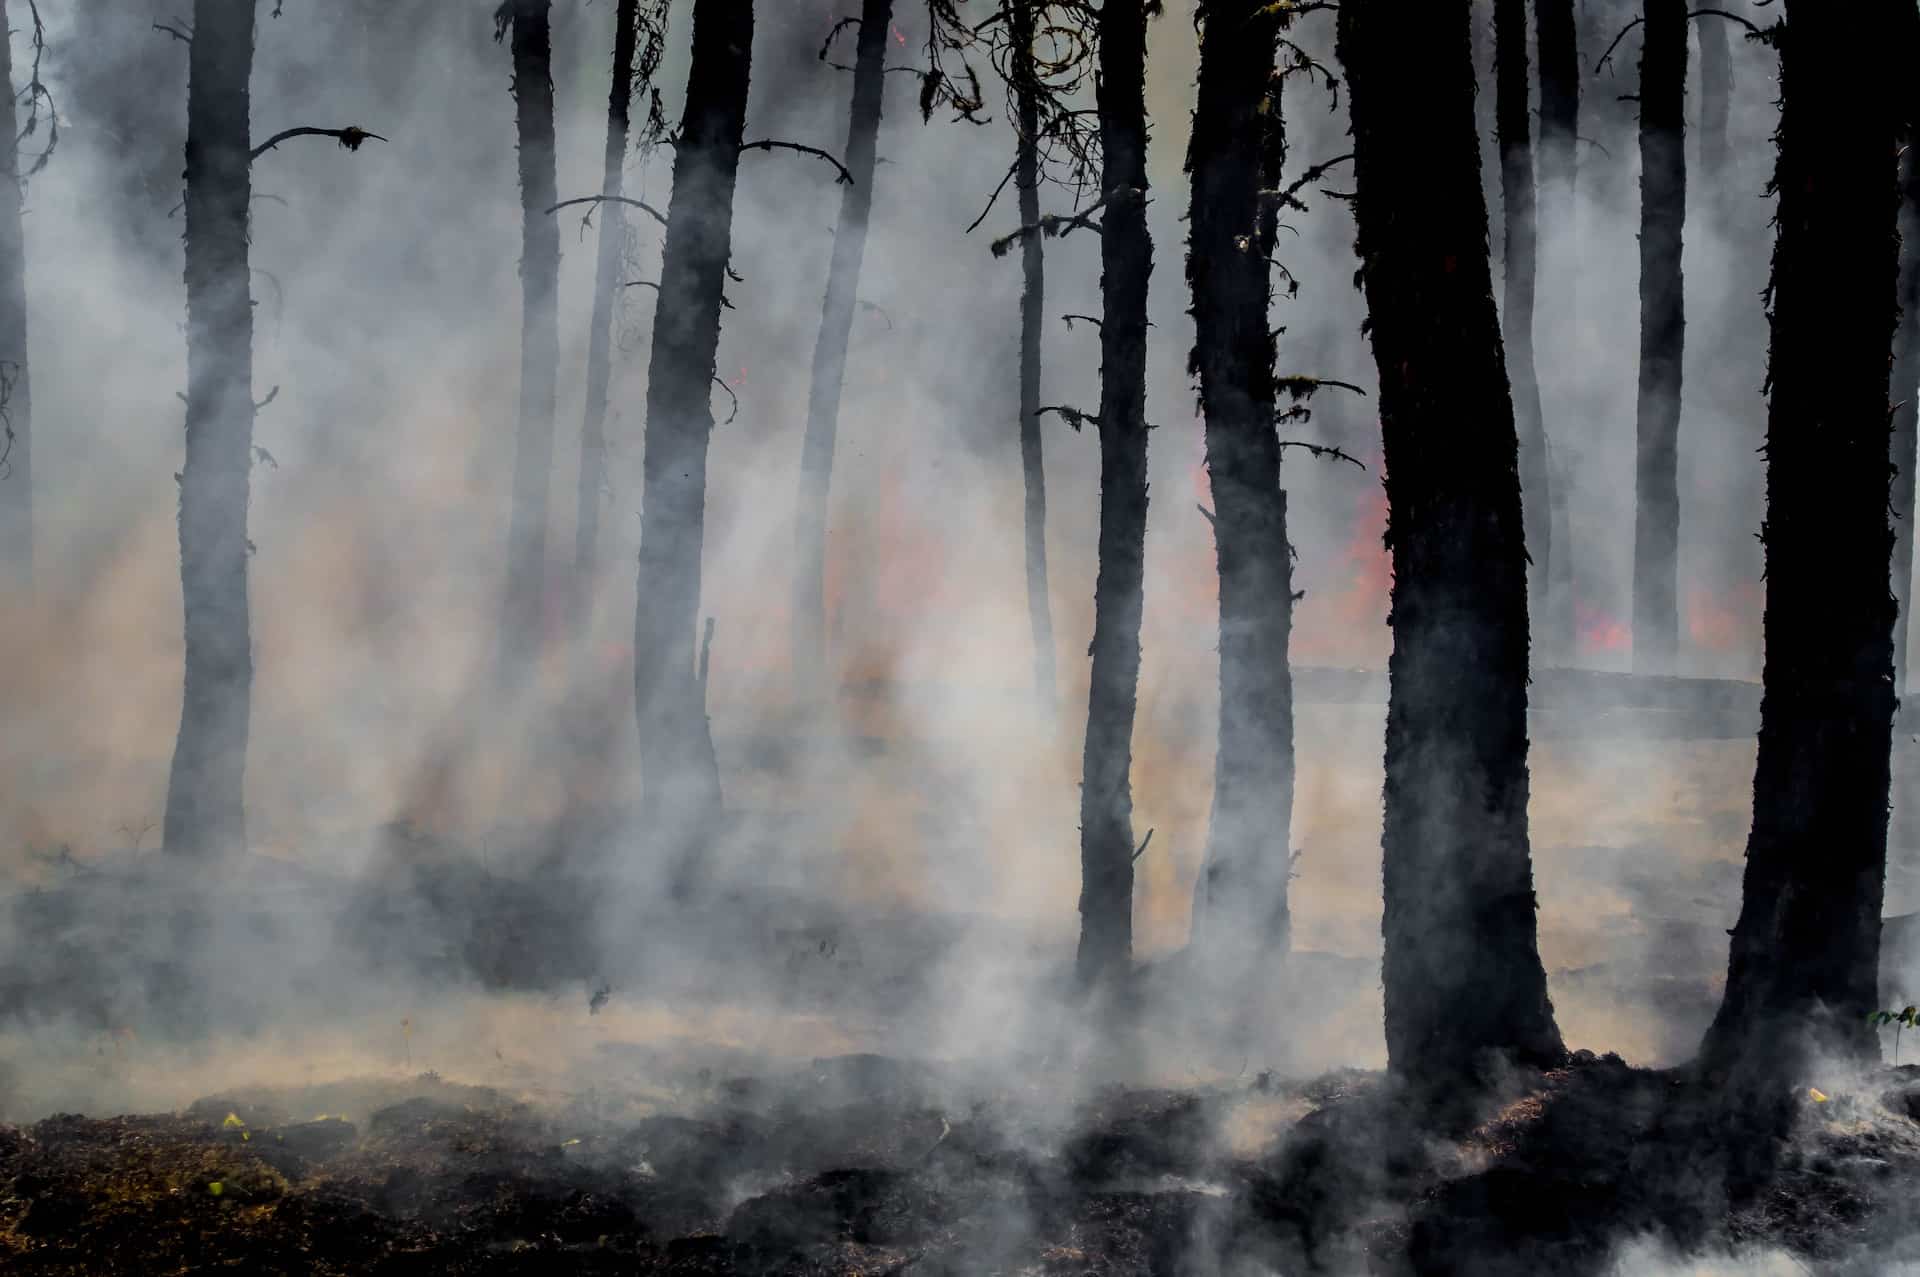 Picture of the aftermath of a fire in the forest